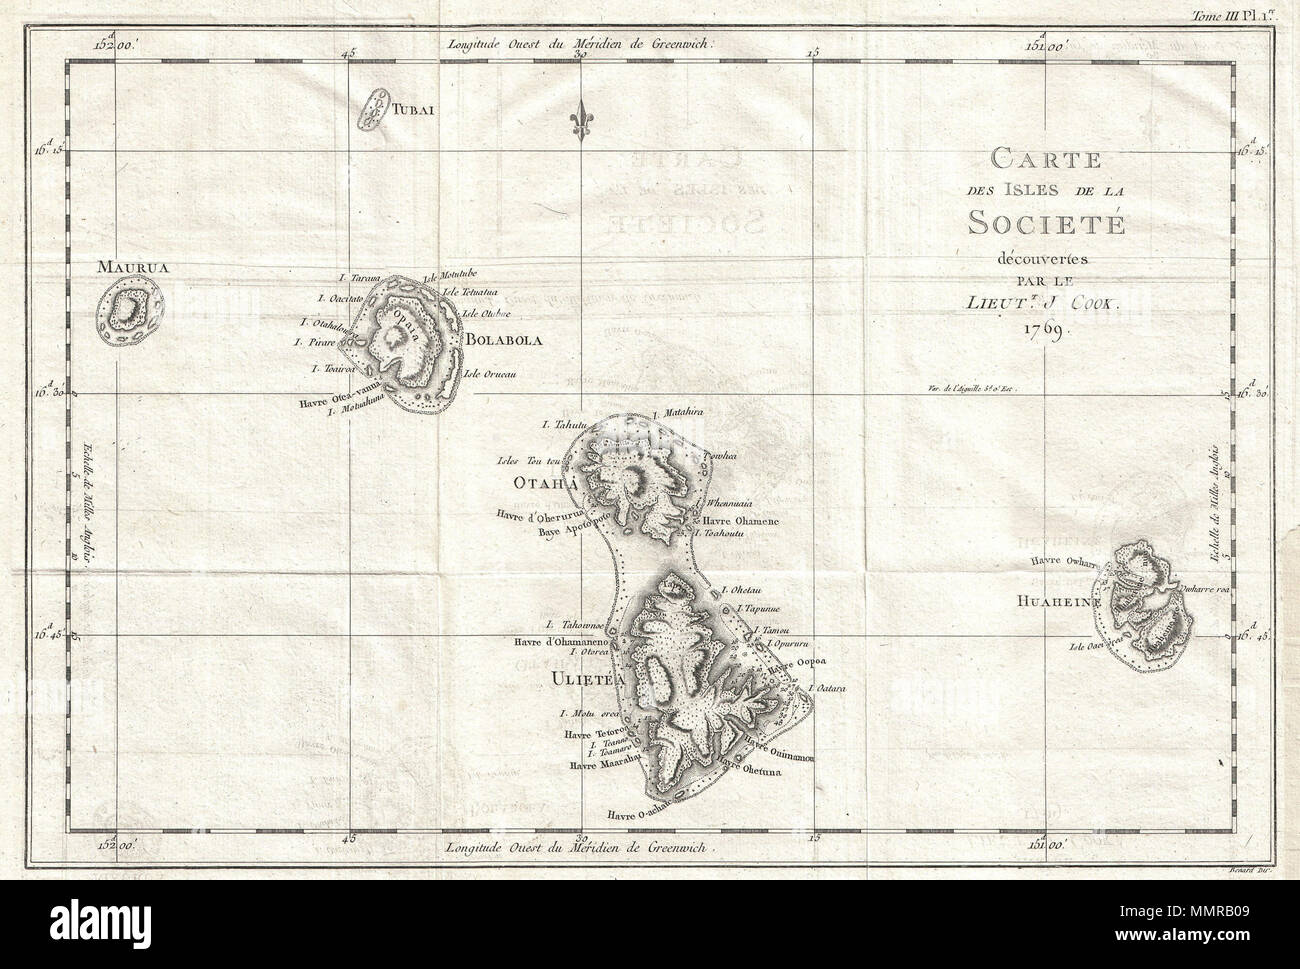 map of the Society Islands, composed by James Cook on his first voyage.  Consists of the islands of Maurua, Tubai, Bolabola, Otaha, Ulietéa and  Huaheine. This group was identified by Cook in